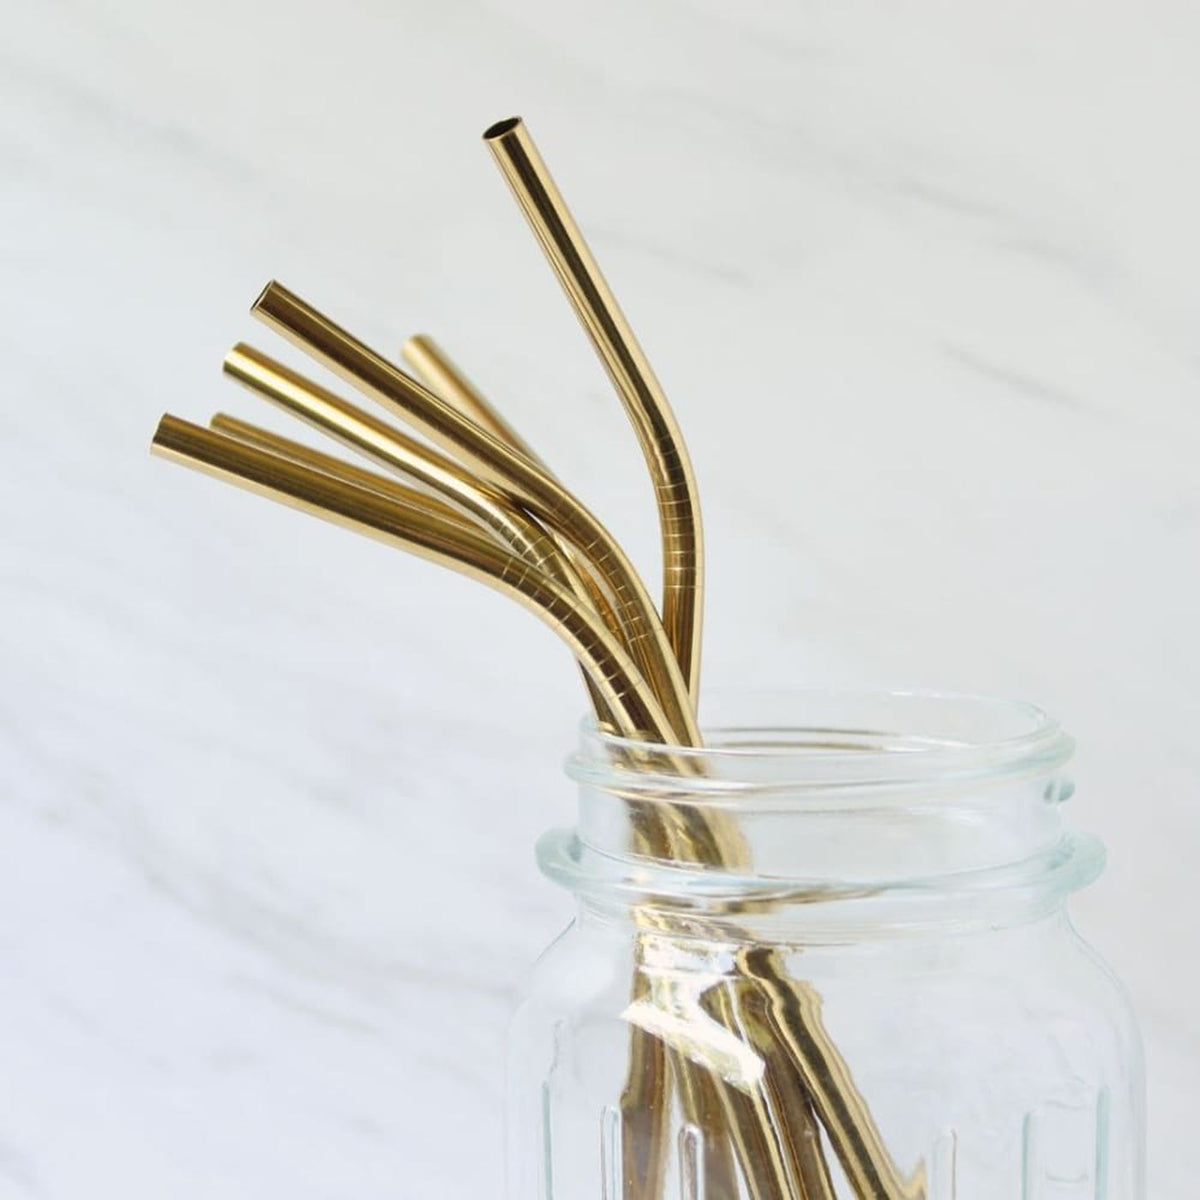 Copper Straws With Cleaner - Pack of 2 (Copper) Straight